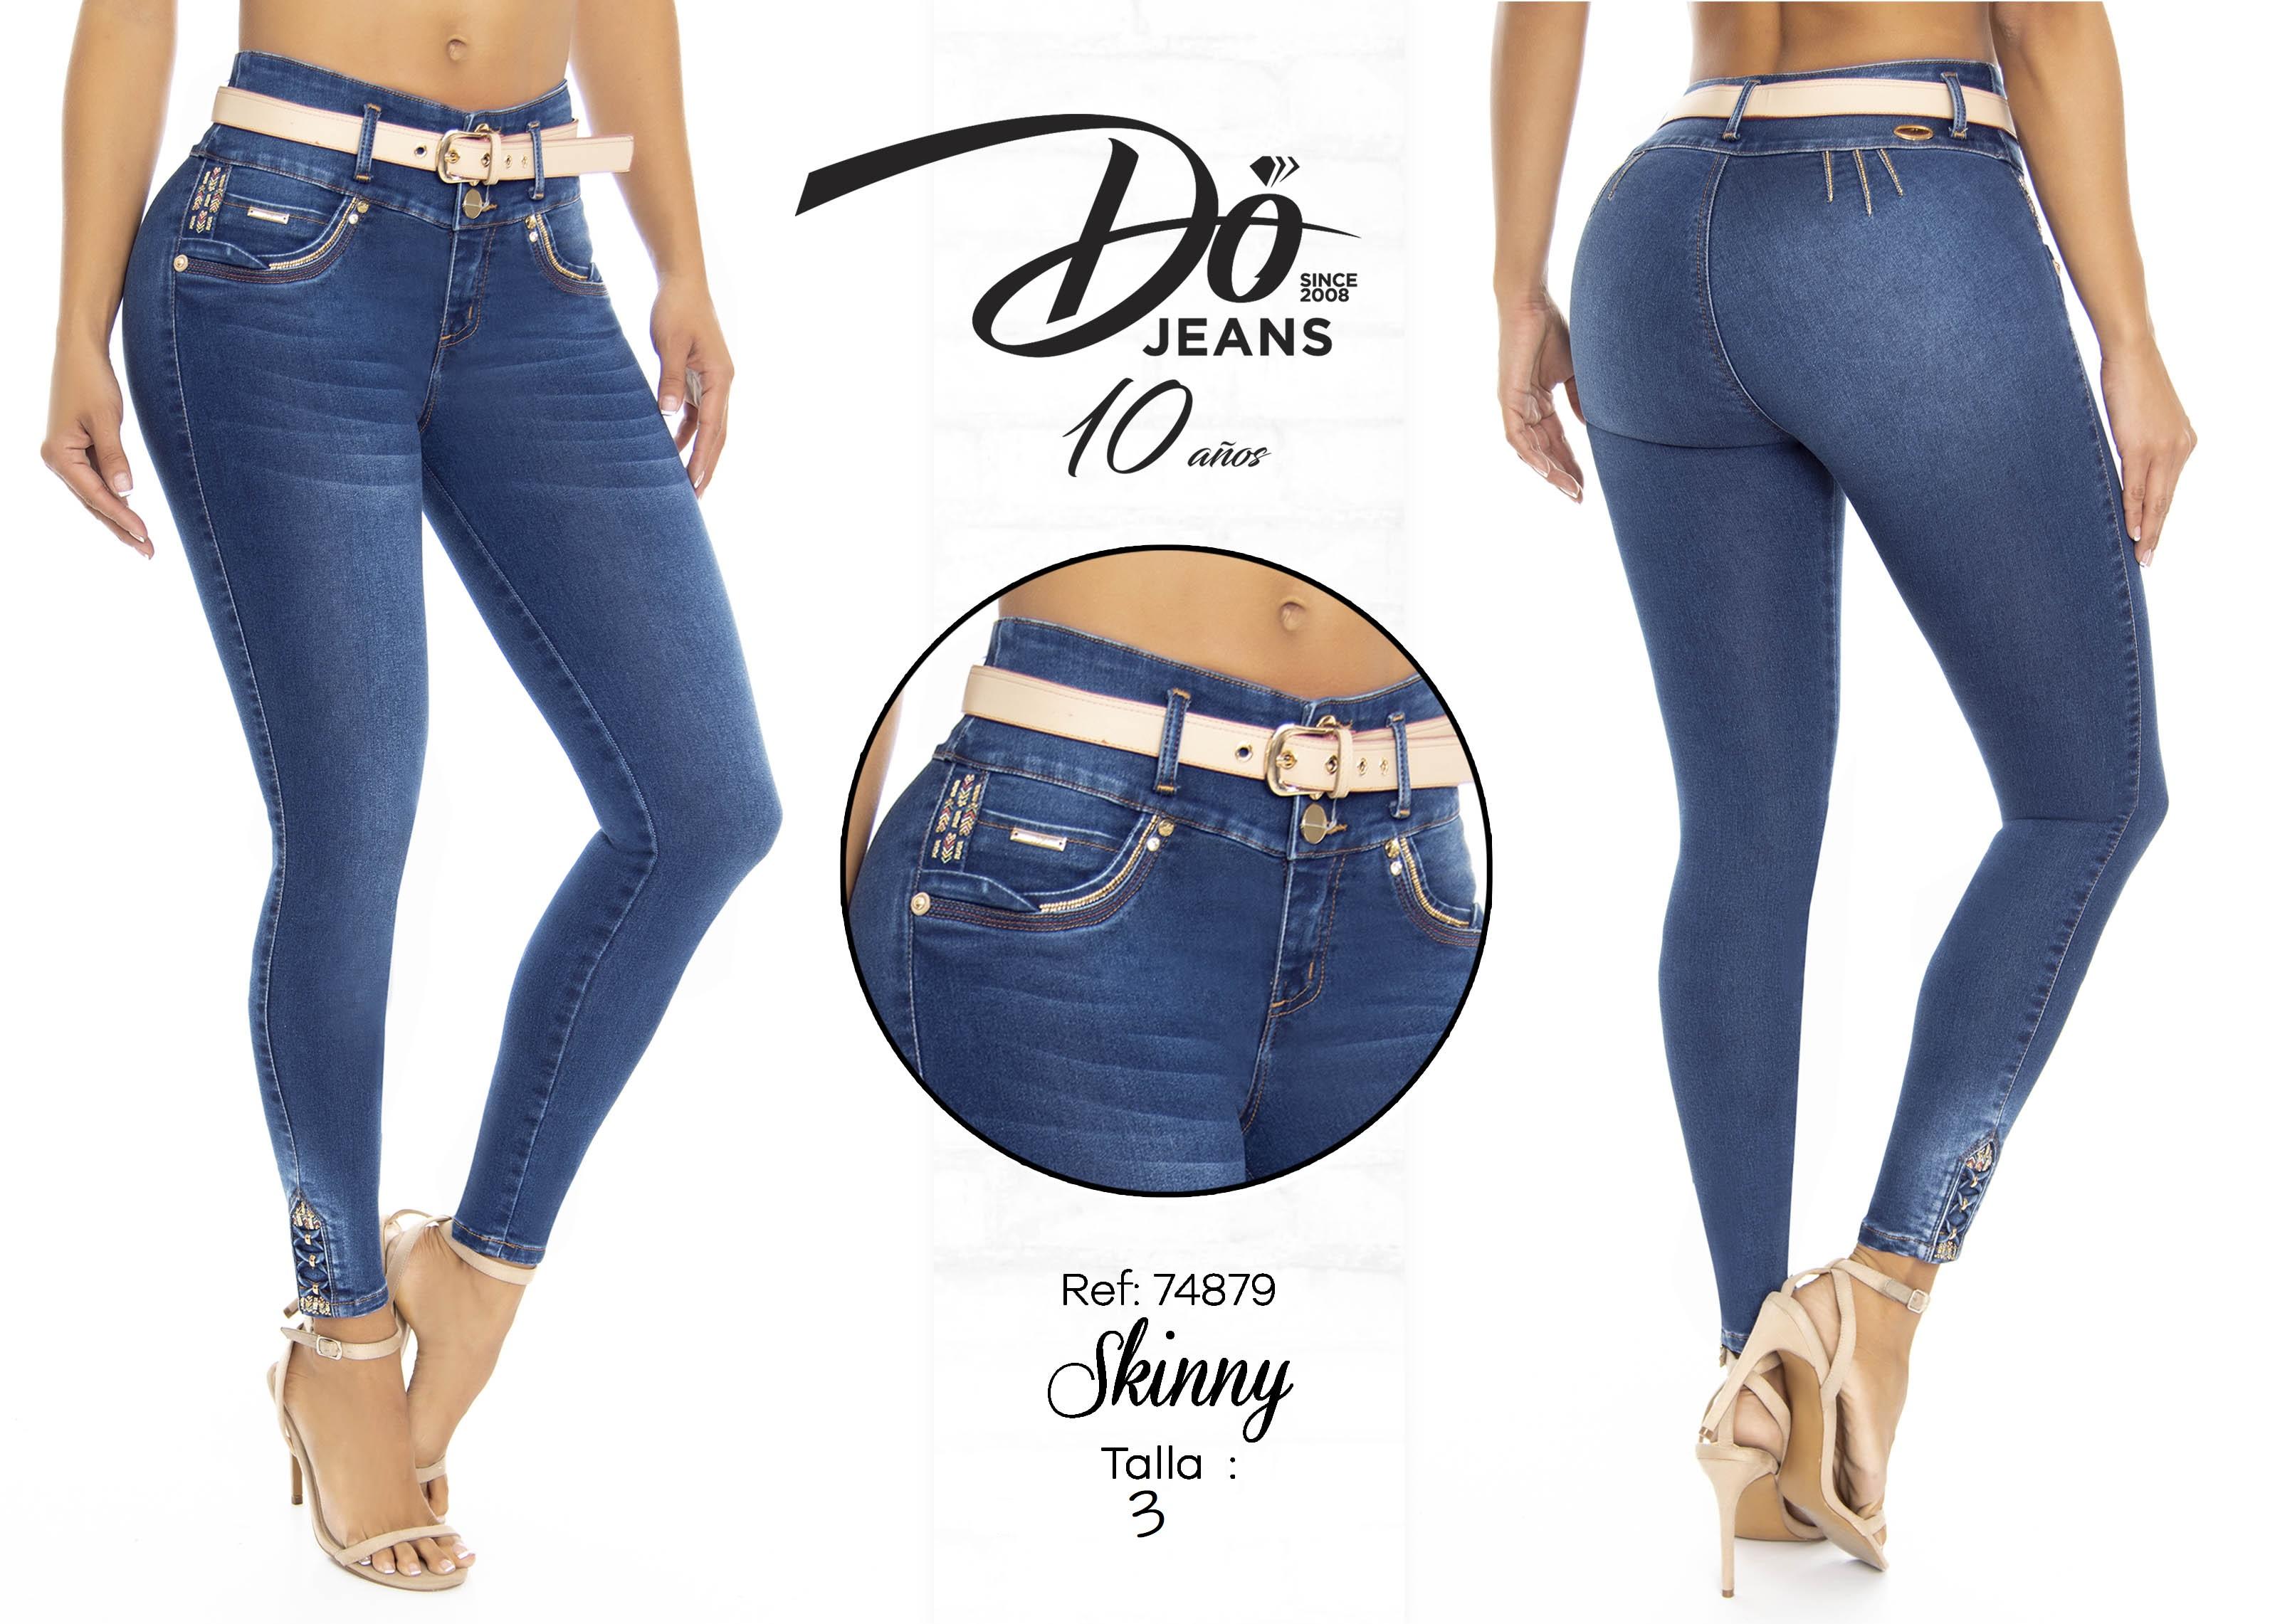 Jeans Levantacola Colombiano - Ref. 248 -74879 D